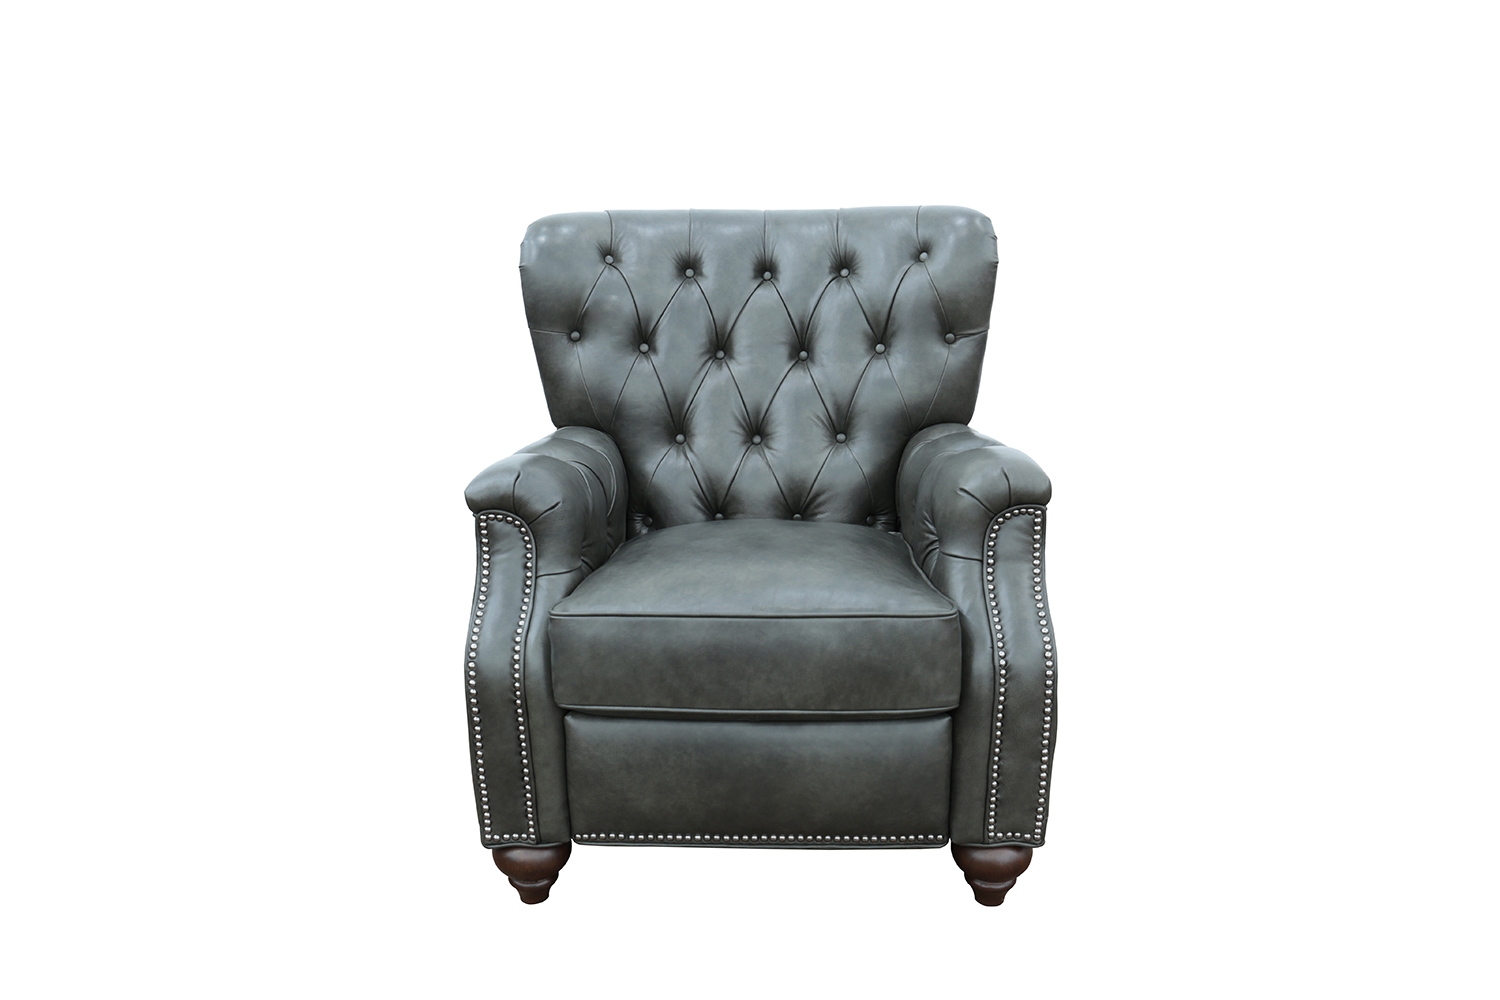 Barcalounger Lombard Recliner Chair - Ashford Graphite/All Leather